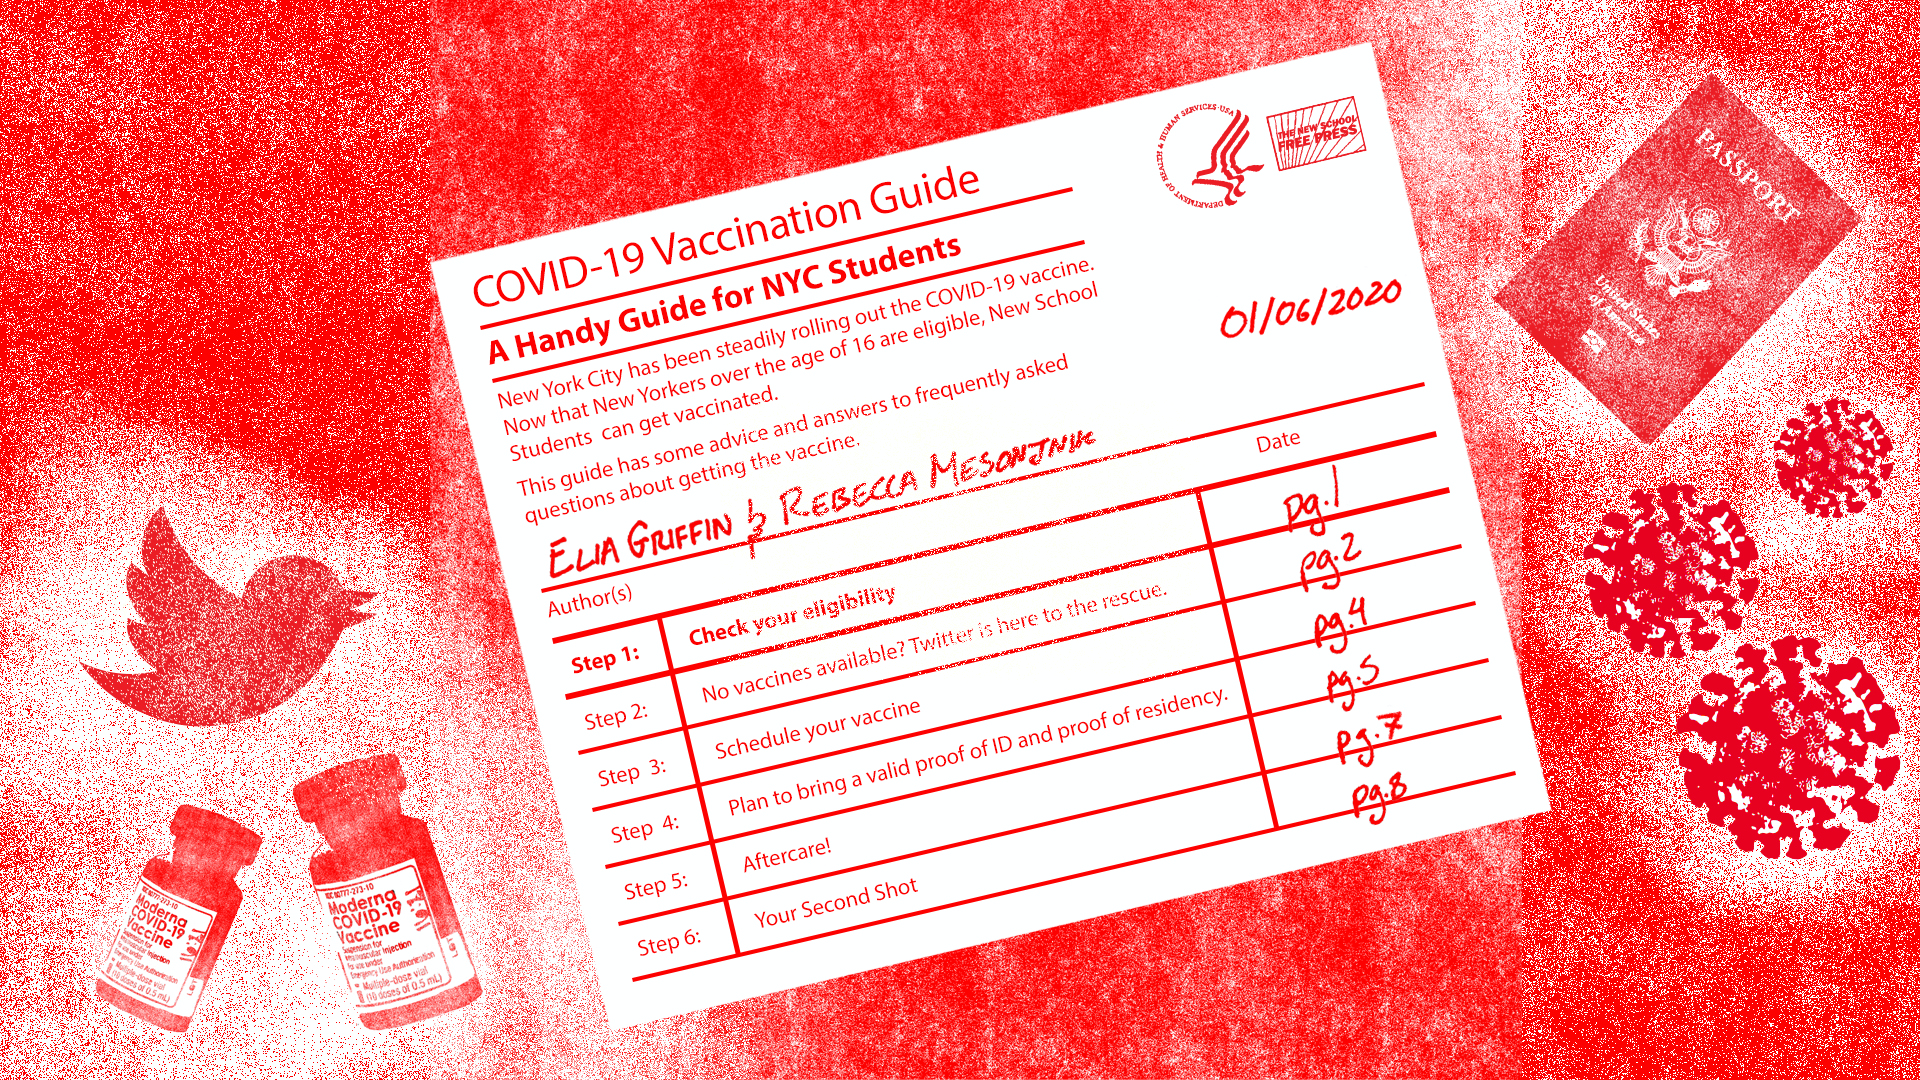 Image of a vaccination card: text: A Handy Guide for NYC Students. By Elia Griffin and Rebecca Mesonjnik.